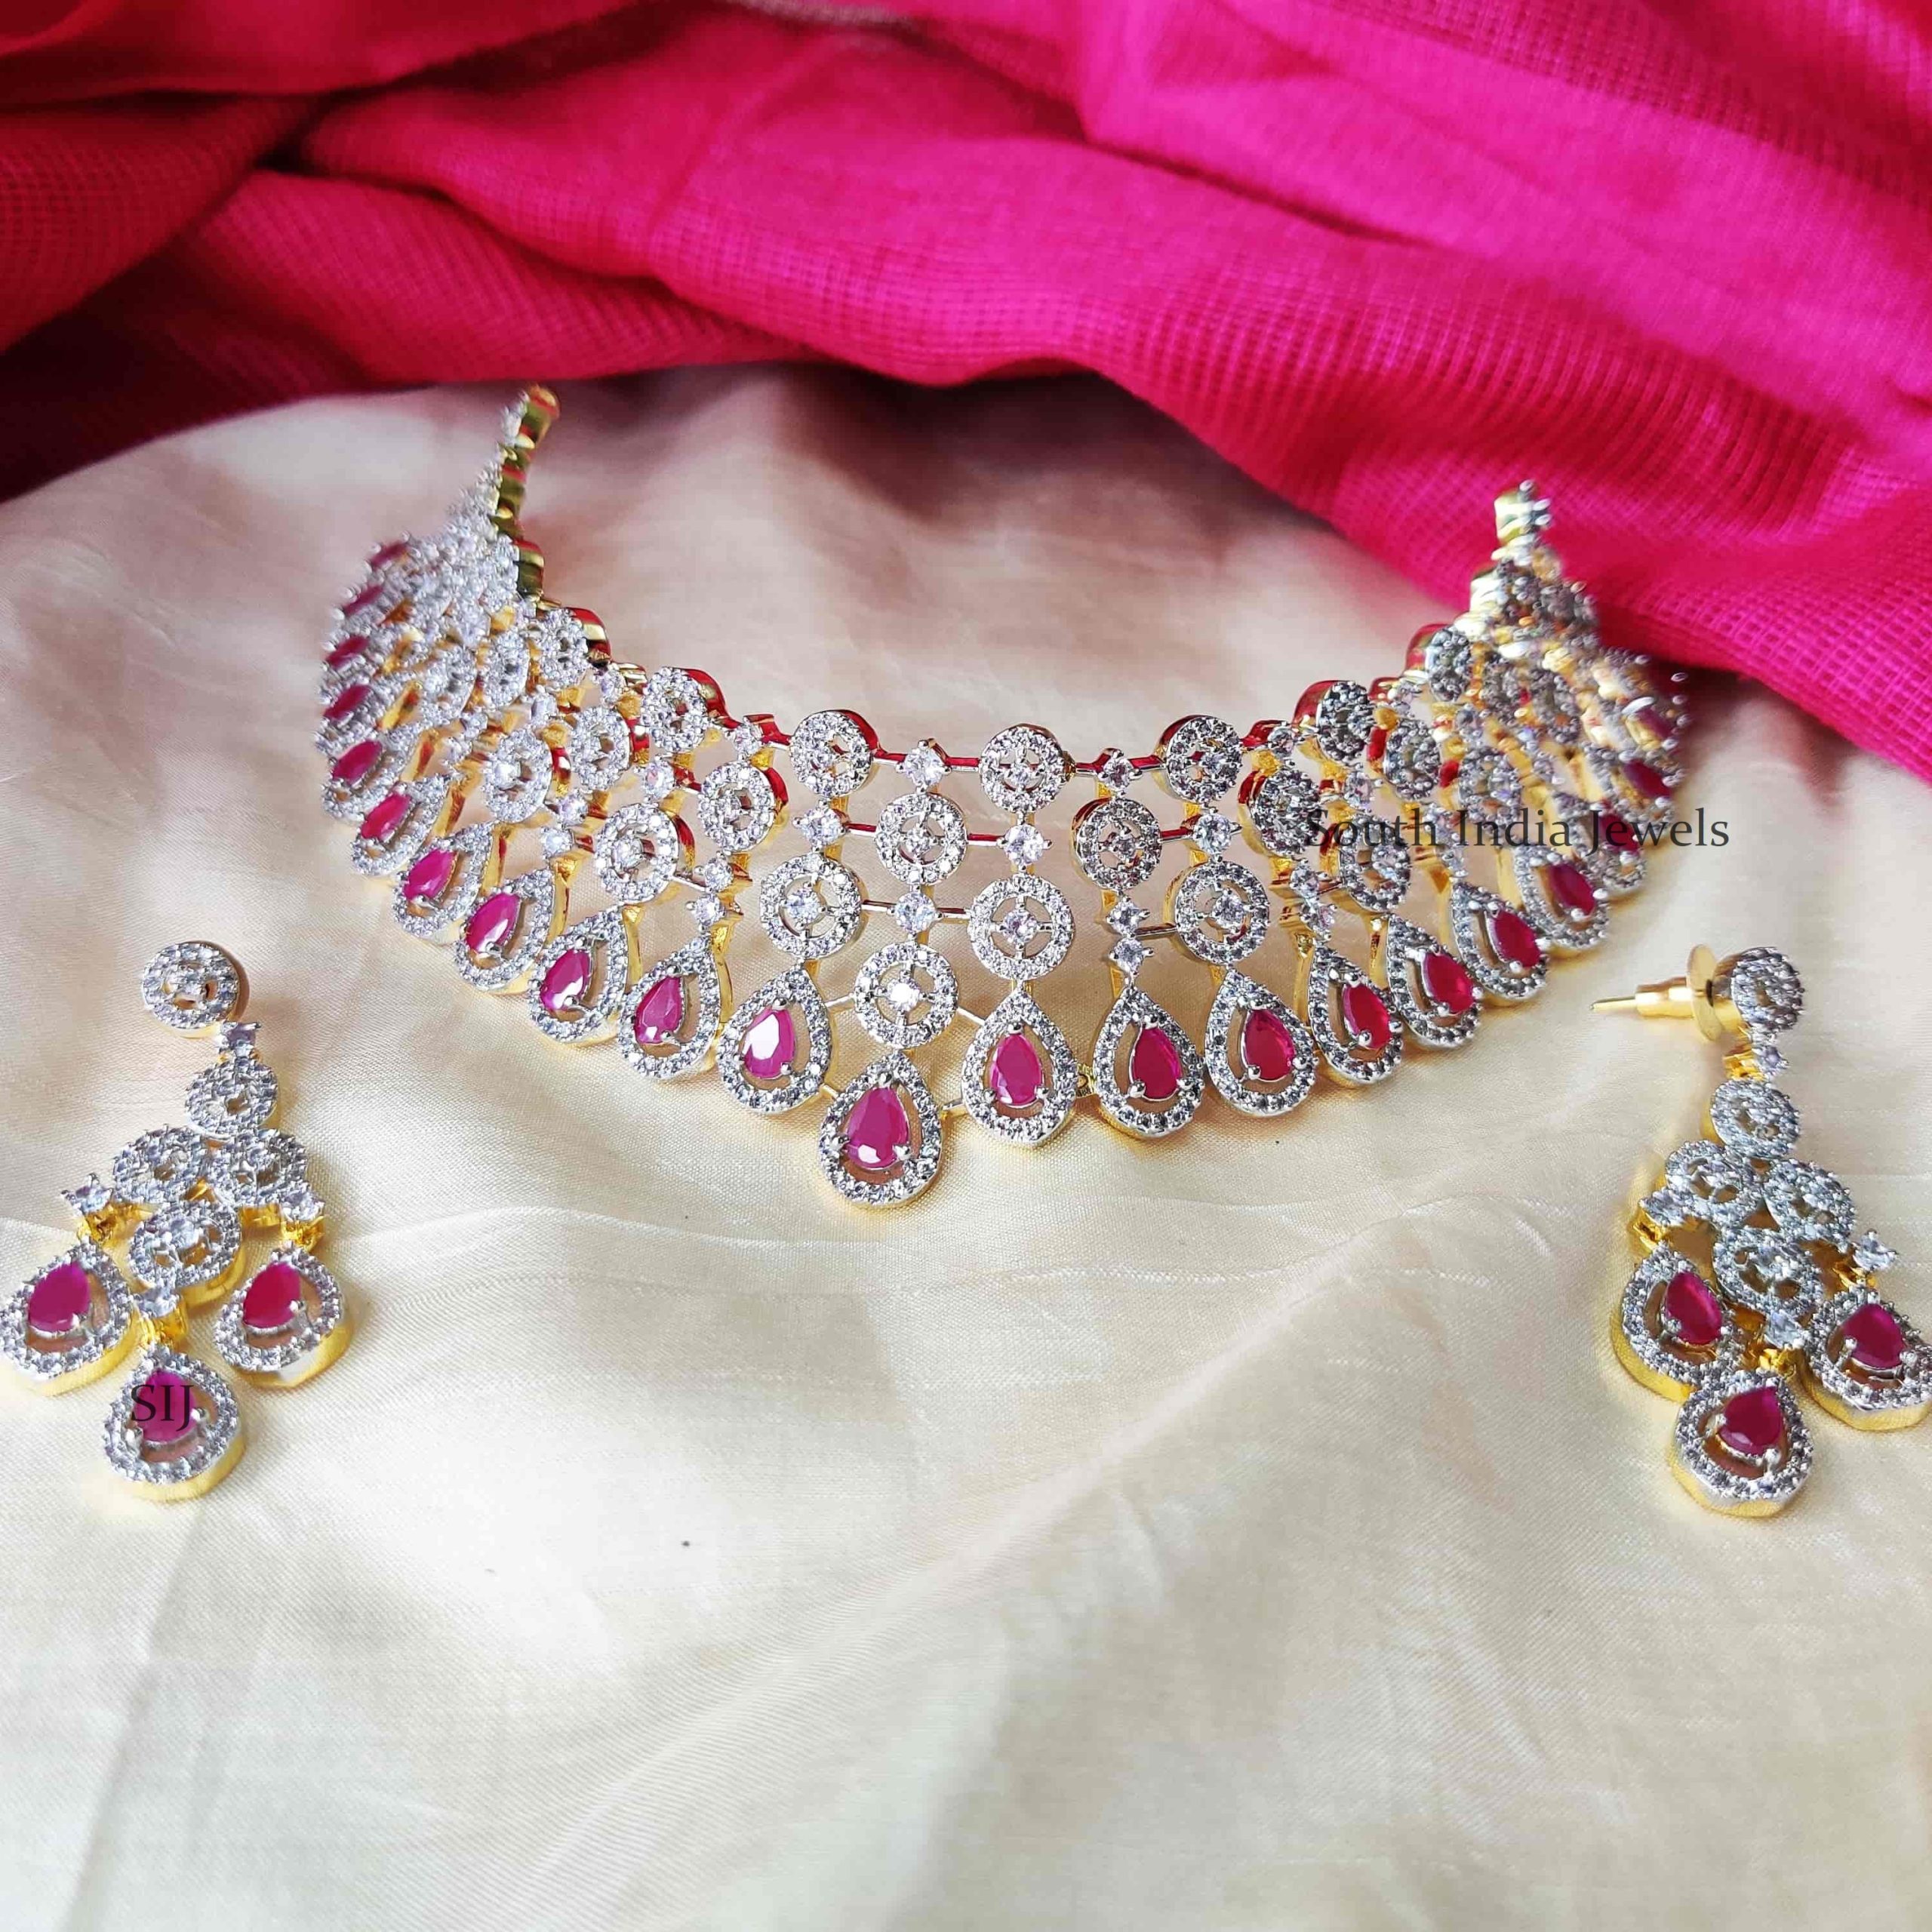 Gold Diamond Necklace with Pink Stones - South India Jewels